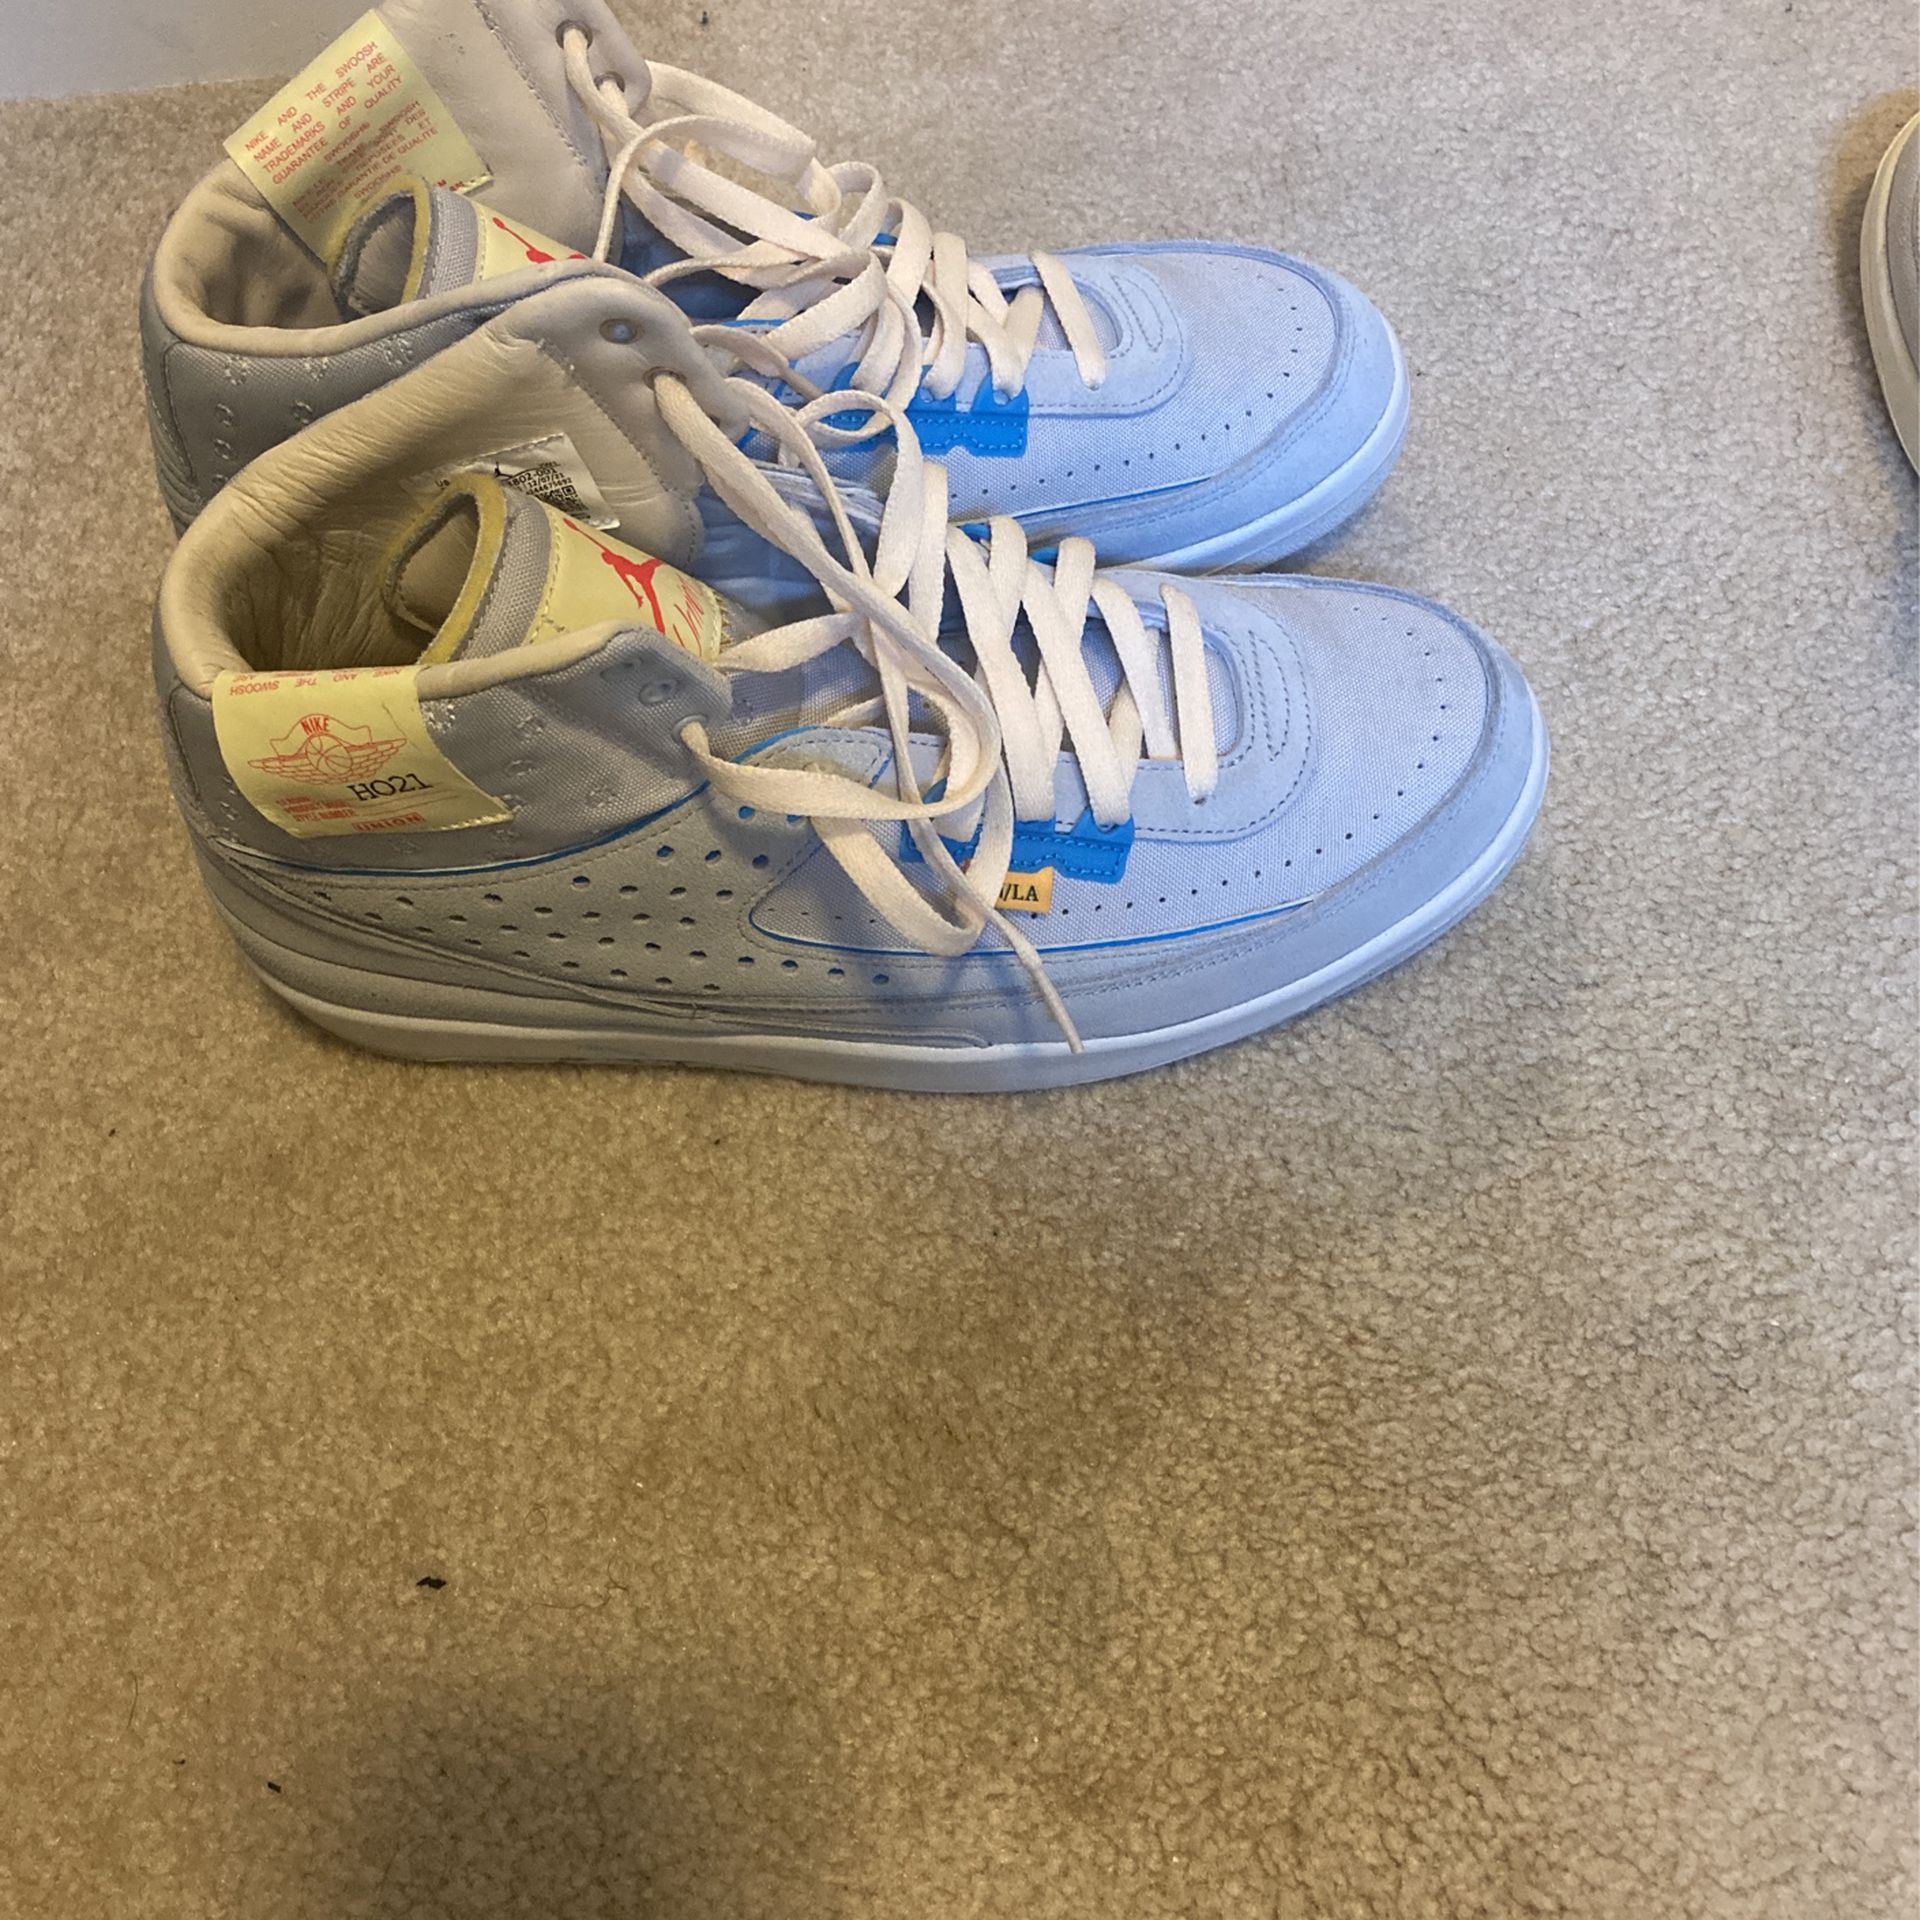 Union 2s Size 11 for Sale in San Francisco, CA - OfferUp